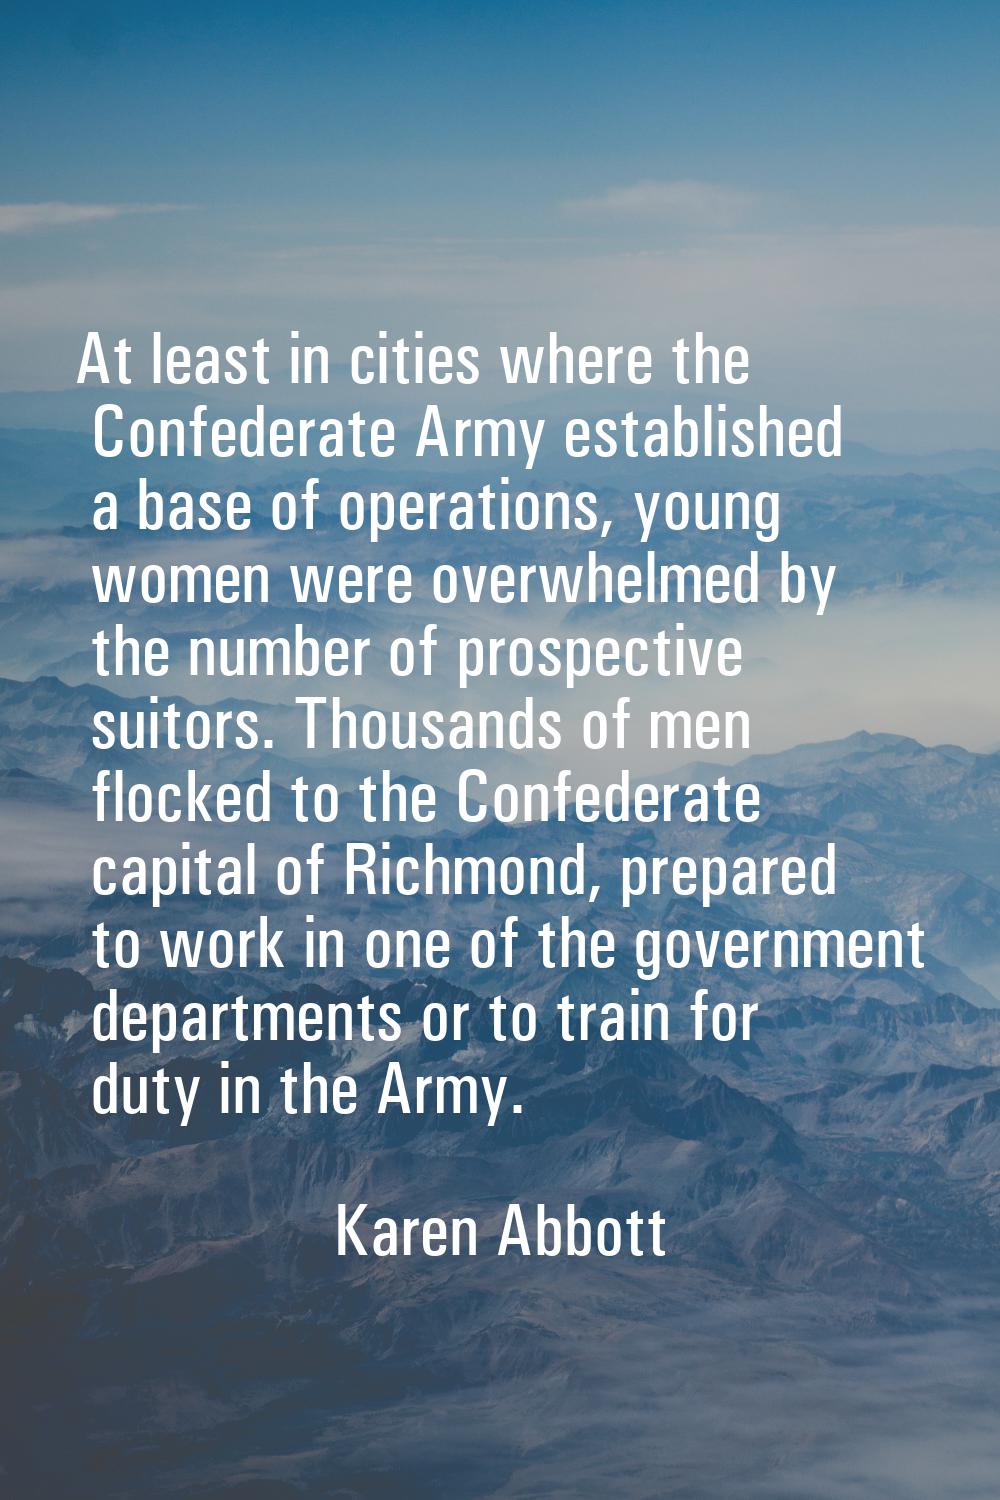 At least in cities where the Confederate Army established a base of operations, young women were ov